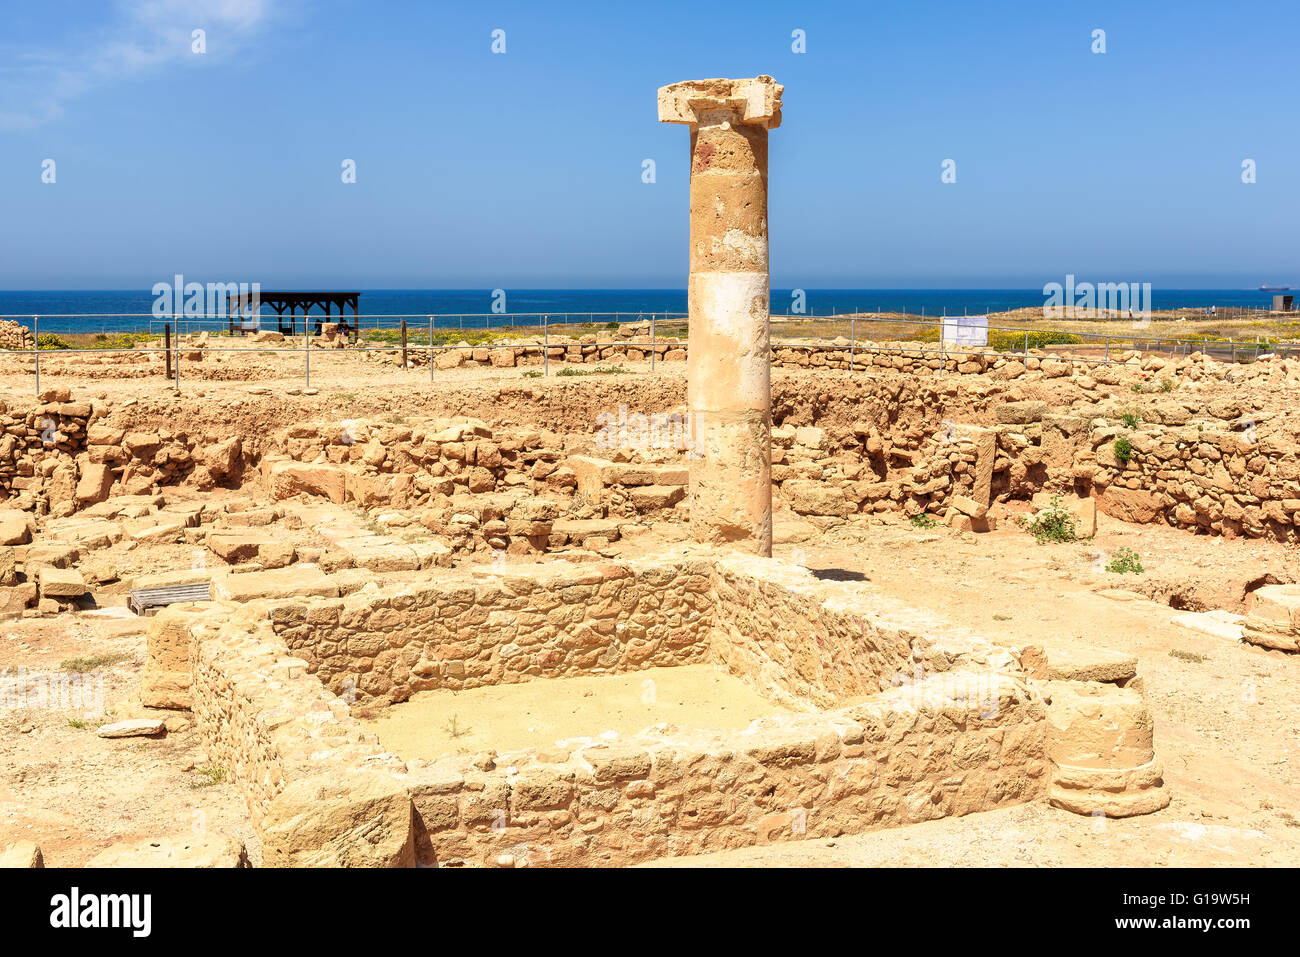 Ancient carved stone column at an archaeological site in Paphos, Cyprus. Stock Photo